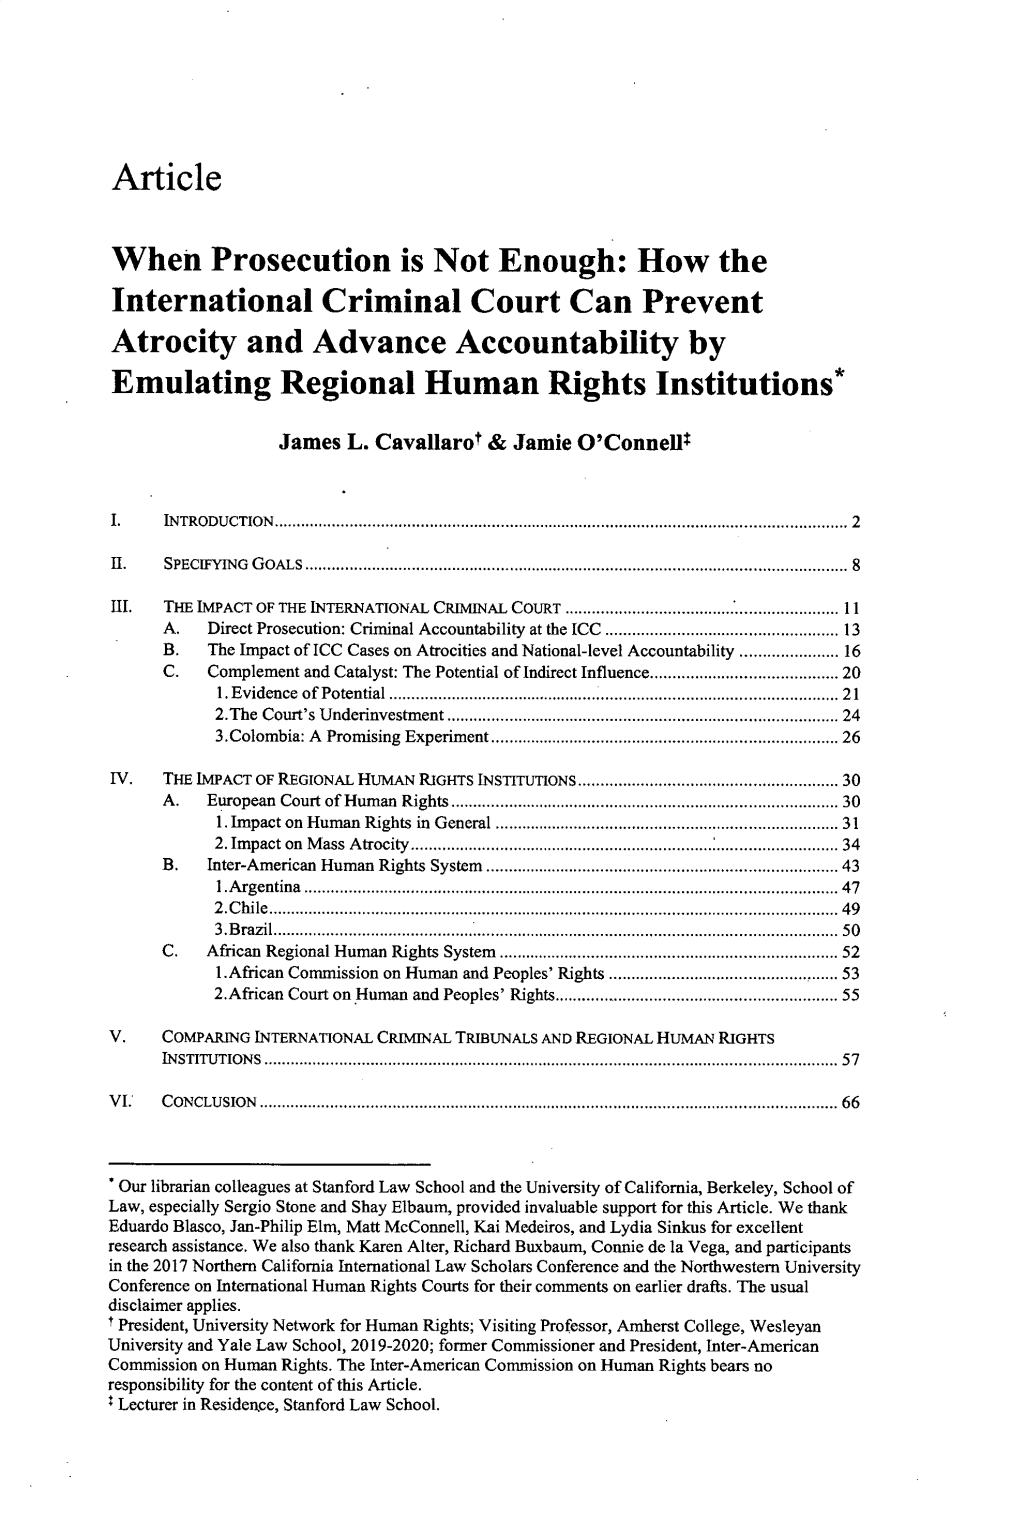 How the International Criminal Court Can Prevent Atrocity and Advance Accountability by Emulating Regional Human Rights Institutions*